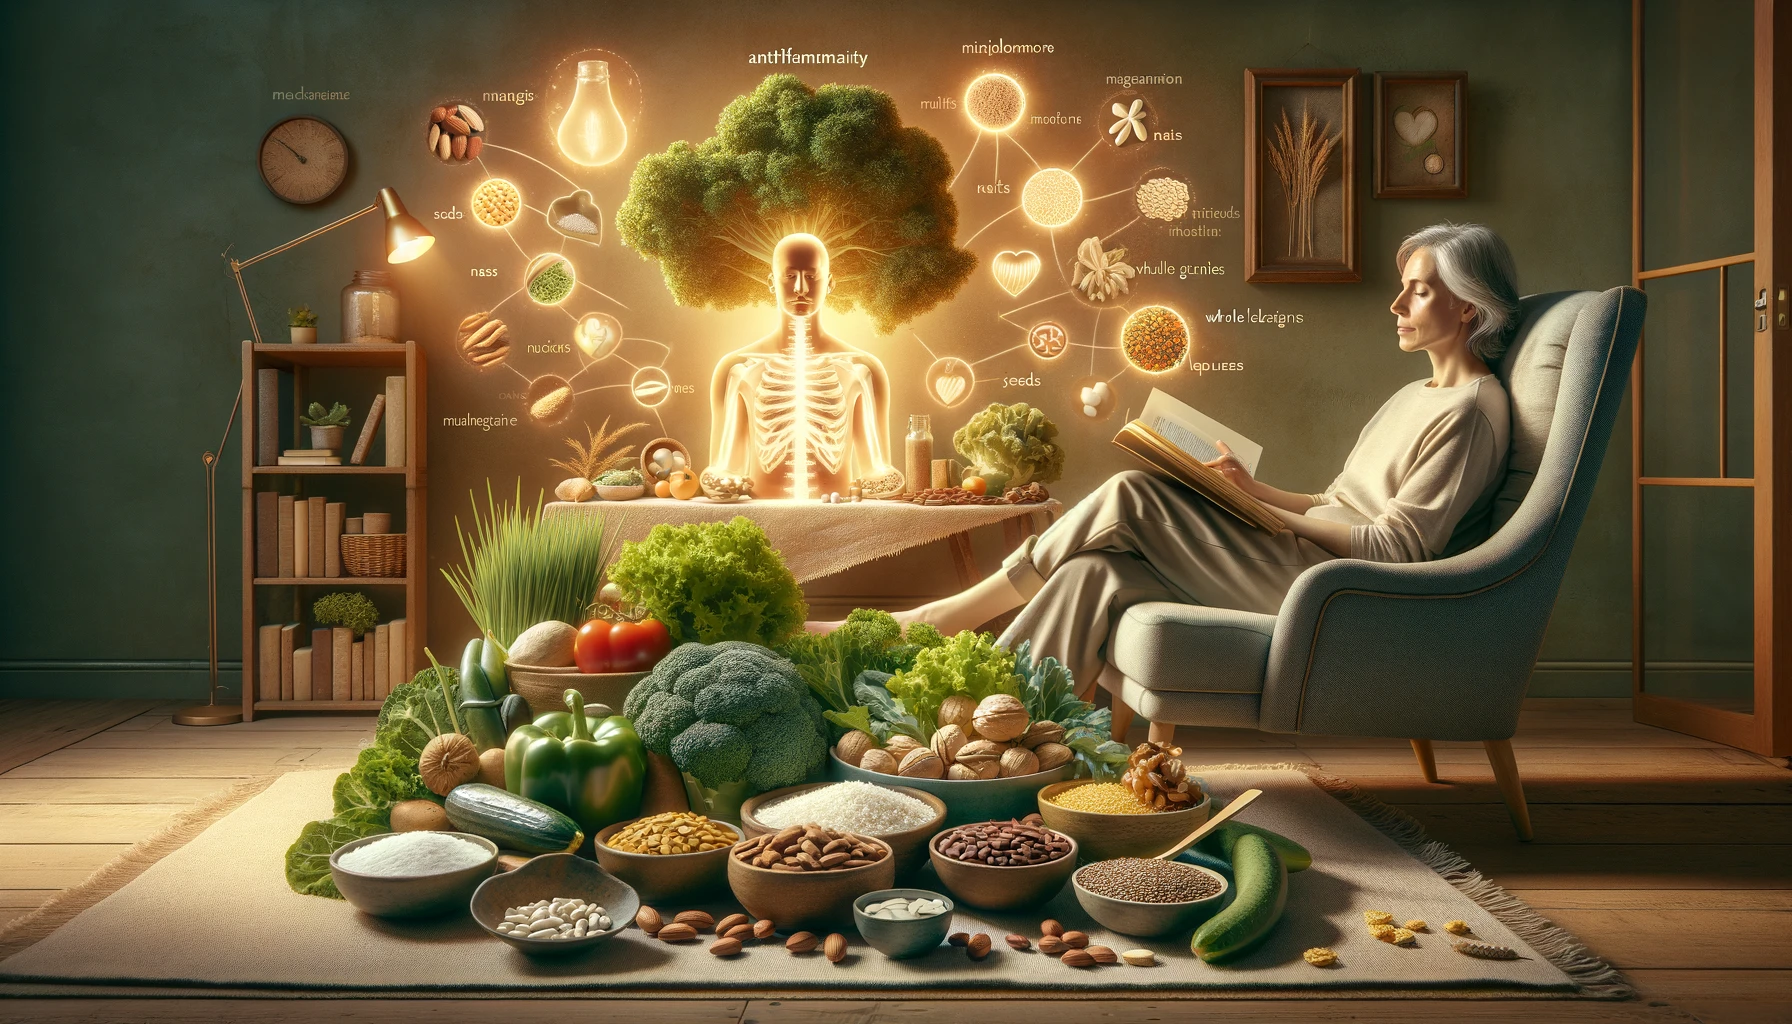 A serene image depicting an assortment of magnesium-rich foods like leafy greens, nuts, and legumes artfully arranged on a wooden surface, symbolizing heart-healthy dietary choices for a sedentary lifestyle.